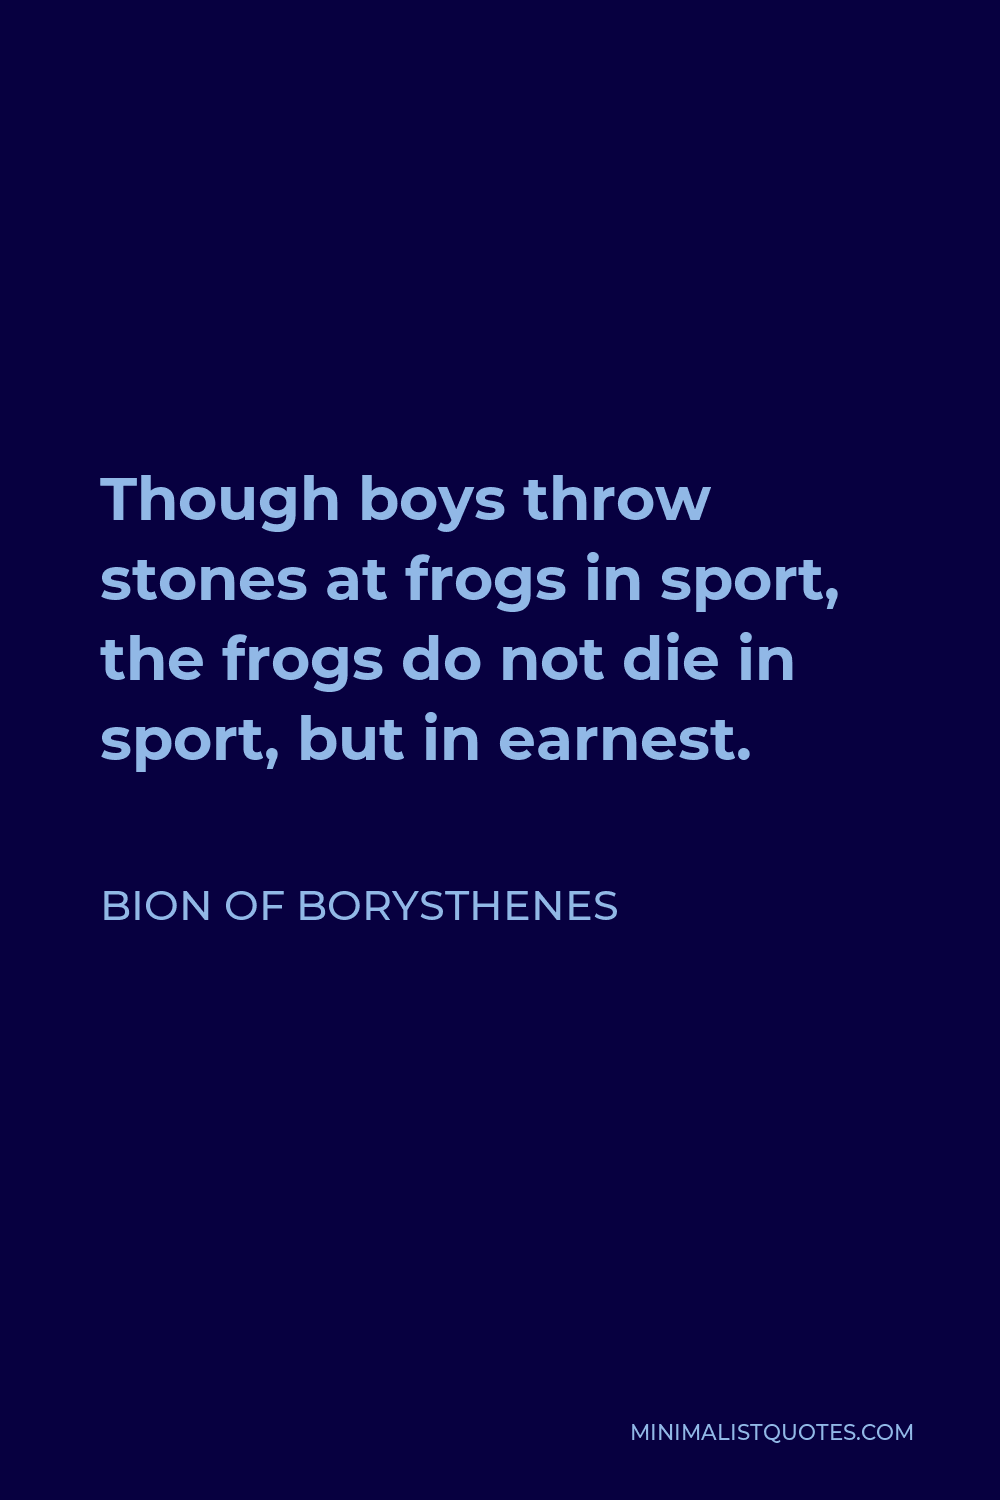 Bion of Borysthenes Quote - Though boys throw stones at frogs in sport, the frogs do not die in sport, but in earnest.